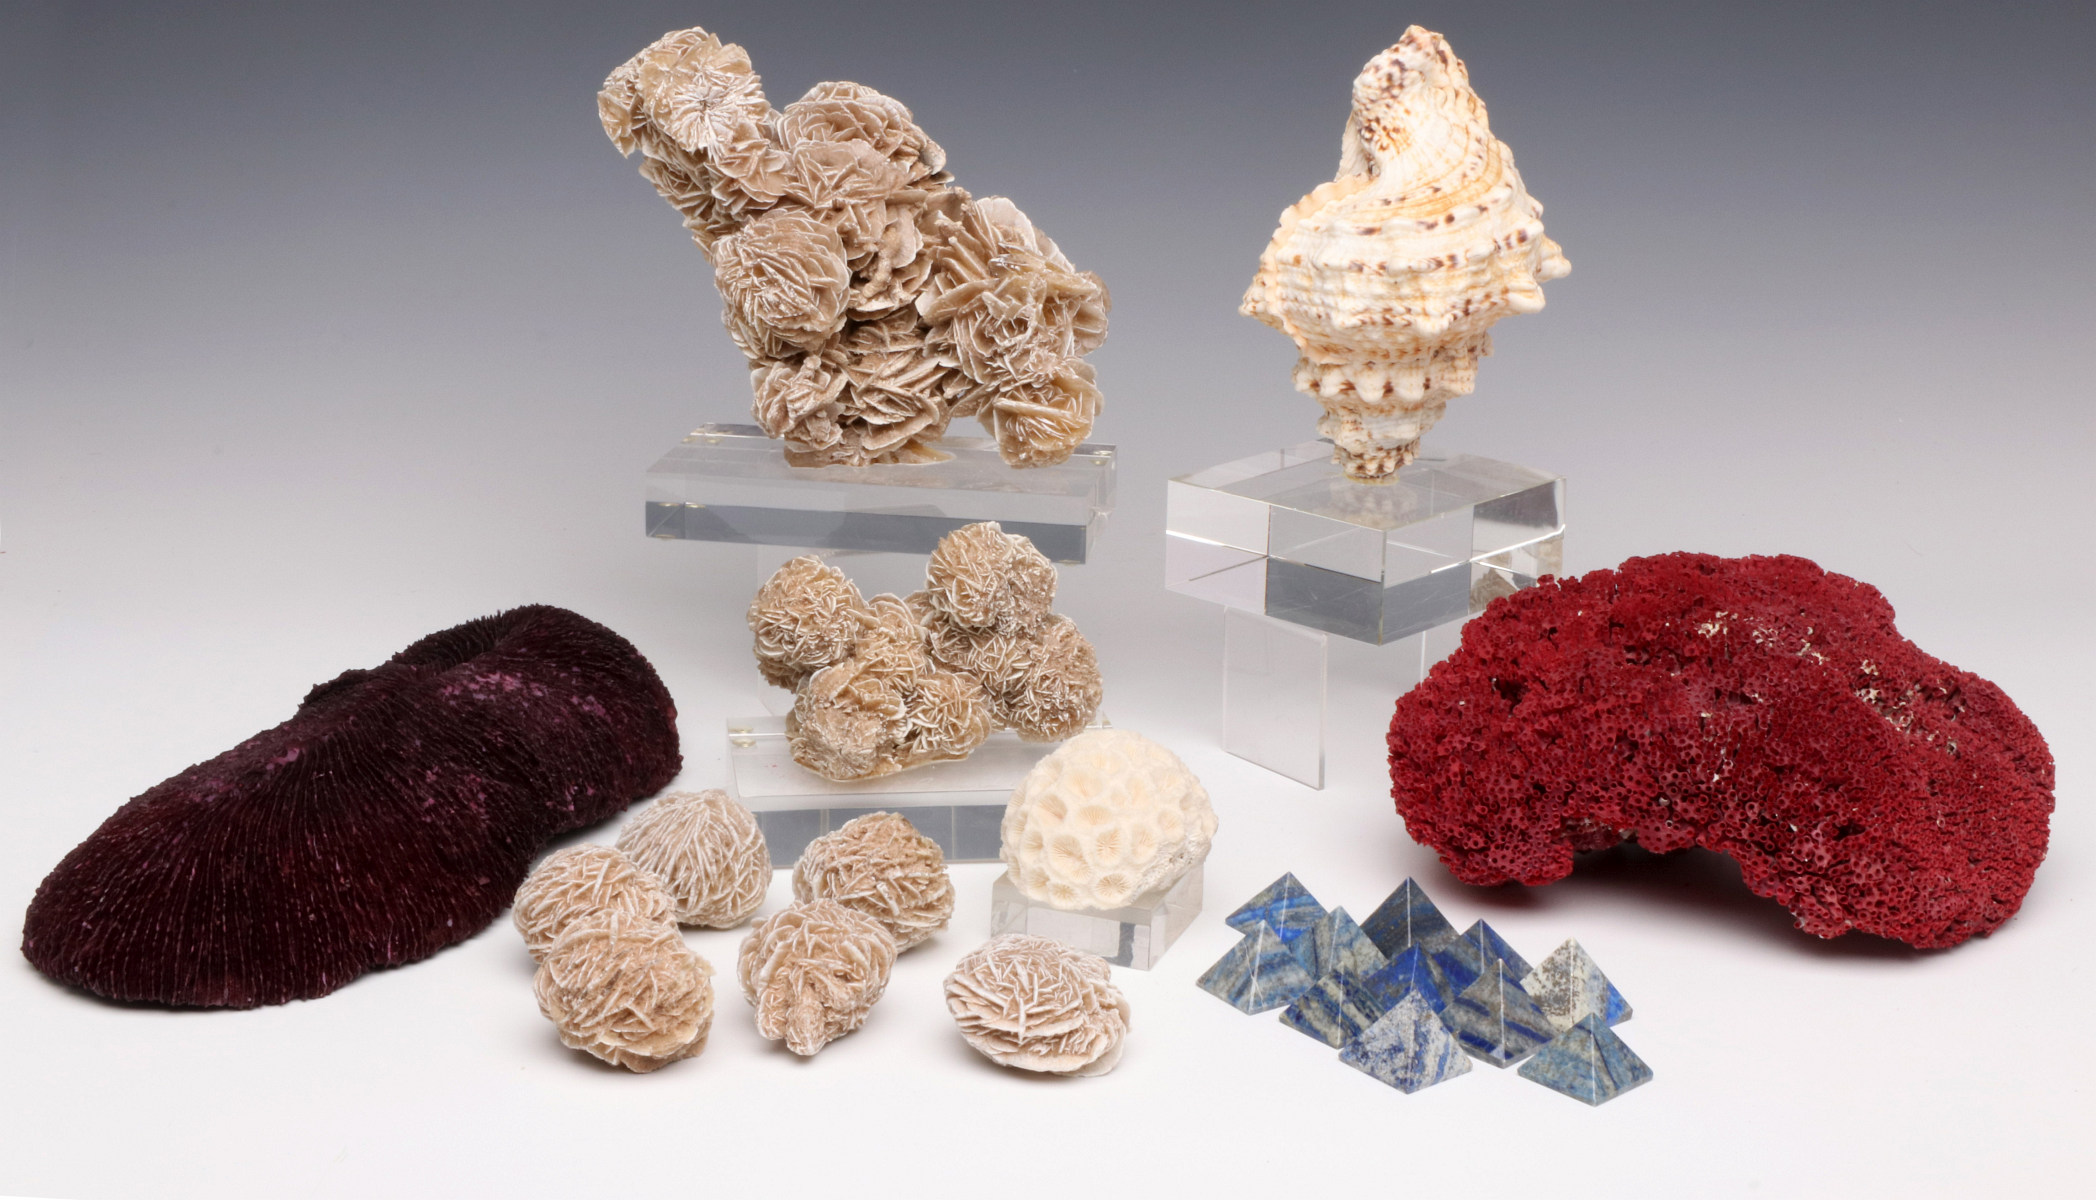 A DISPLAY OF CORAL, SHELL AND MINERAL SPECIMENS